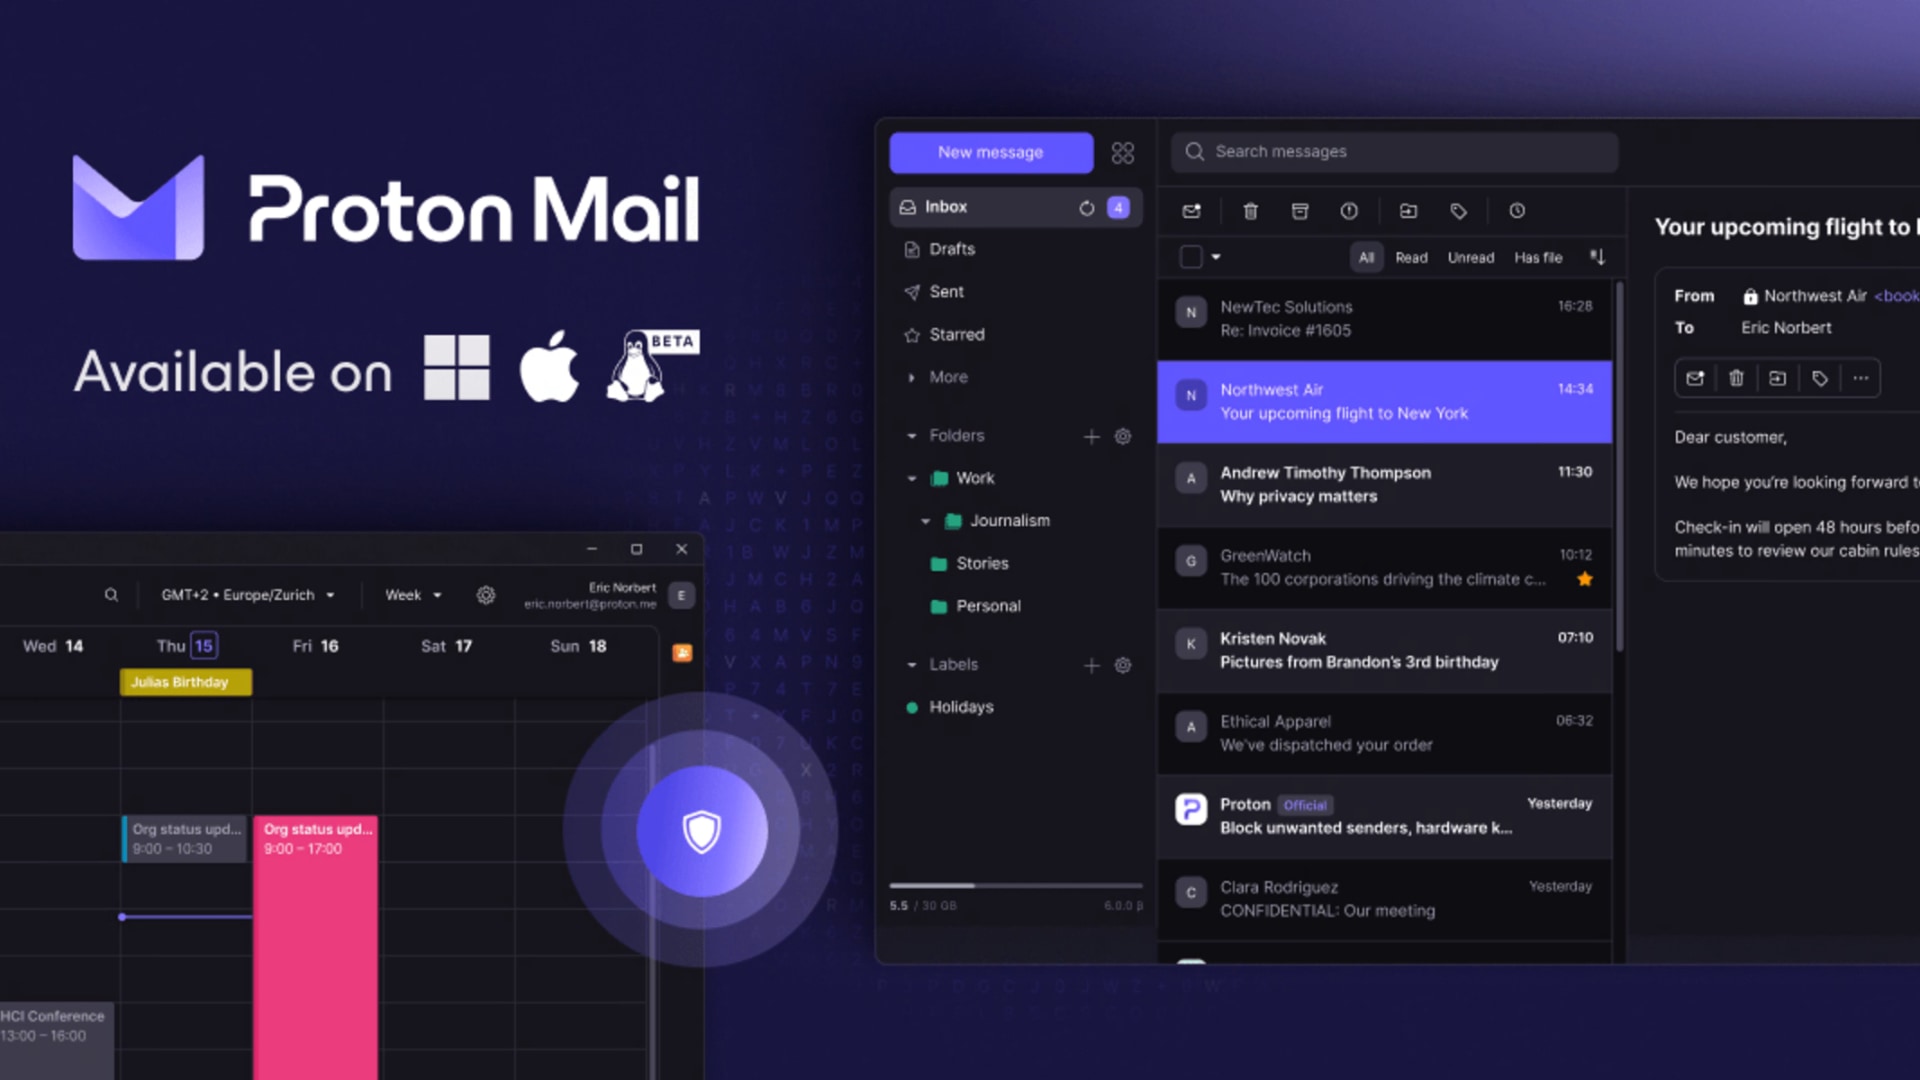 Proton Mail launches an end-to-end encrypted desktop app